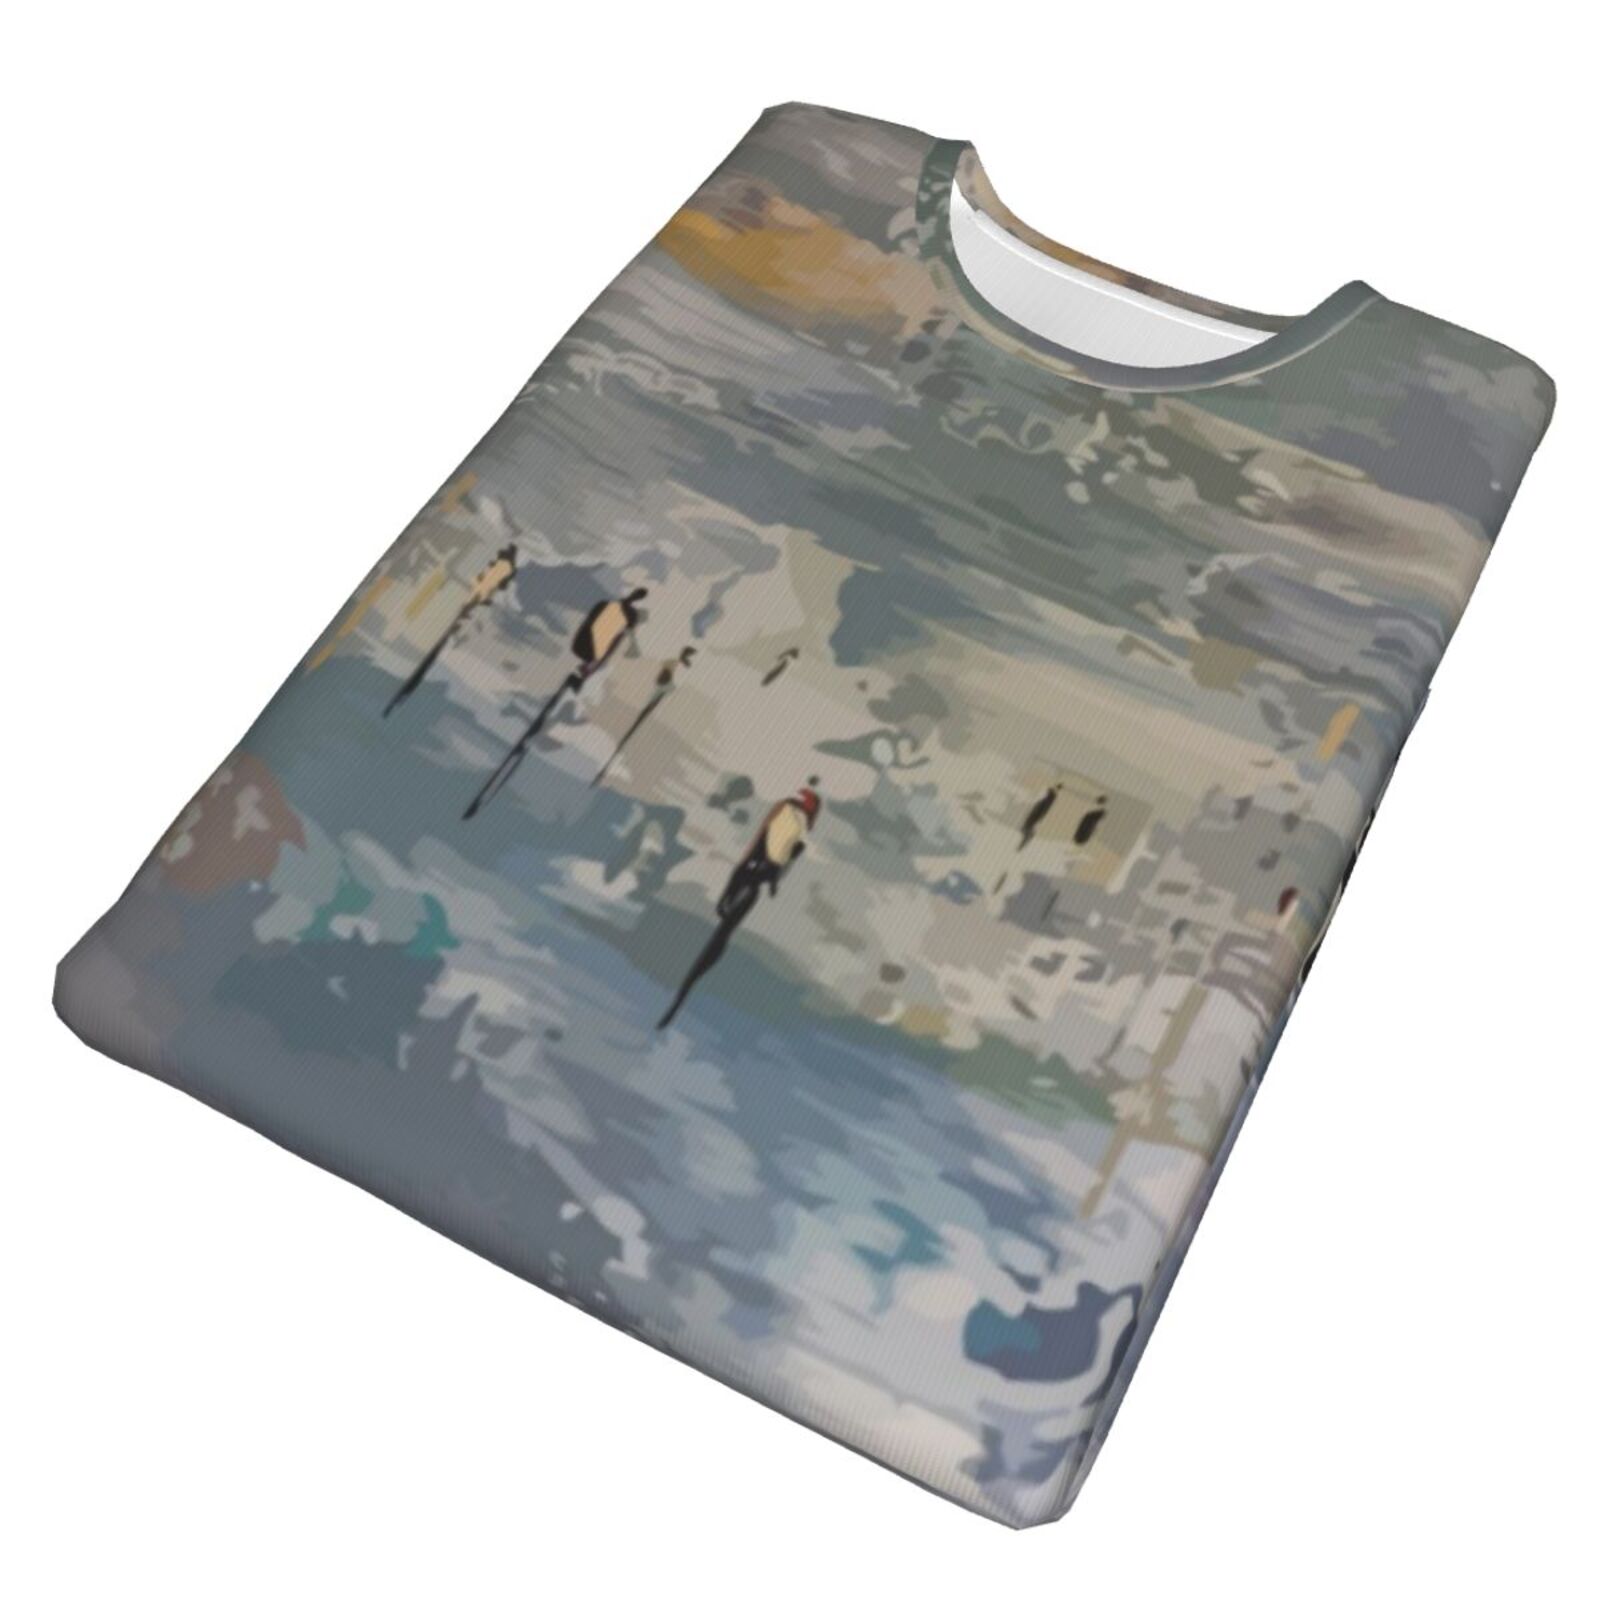 T-shirt Suisse Classique Talk To The Clouds Painting Elements